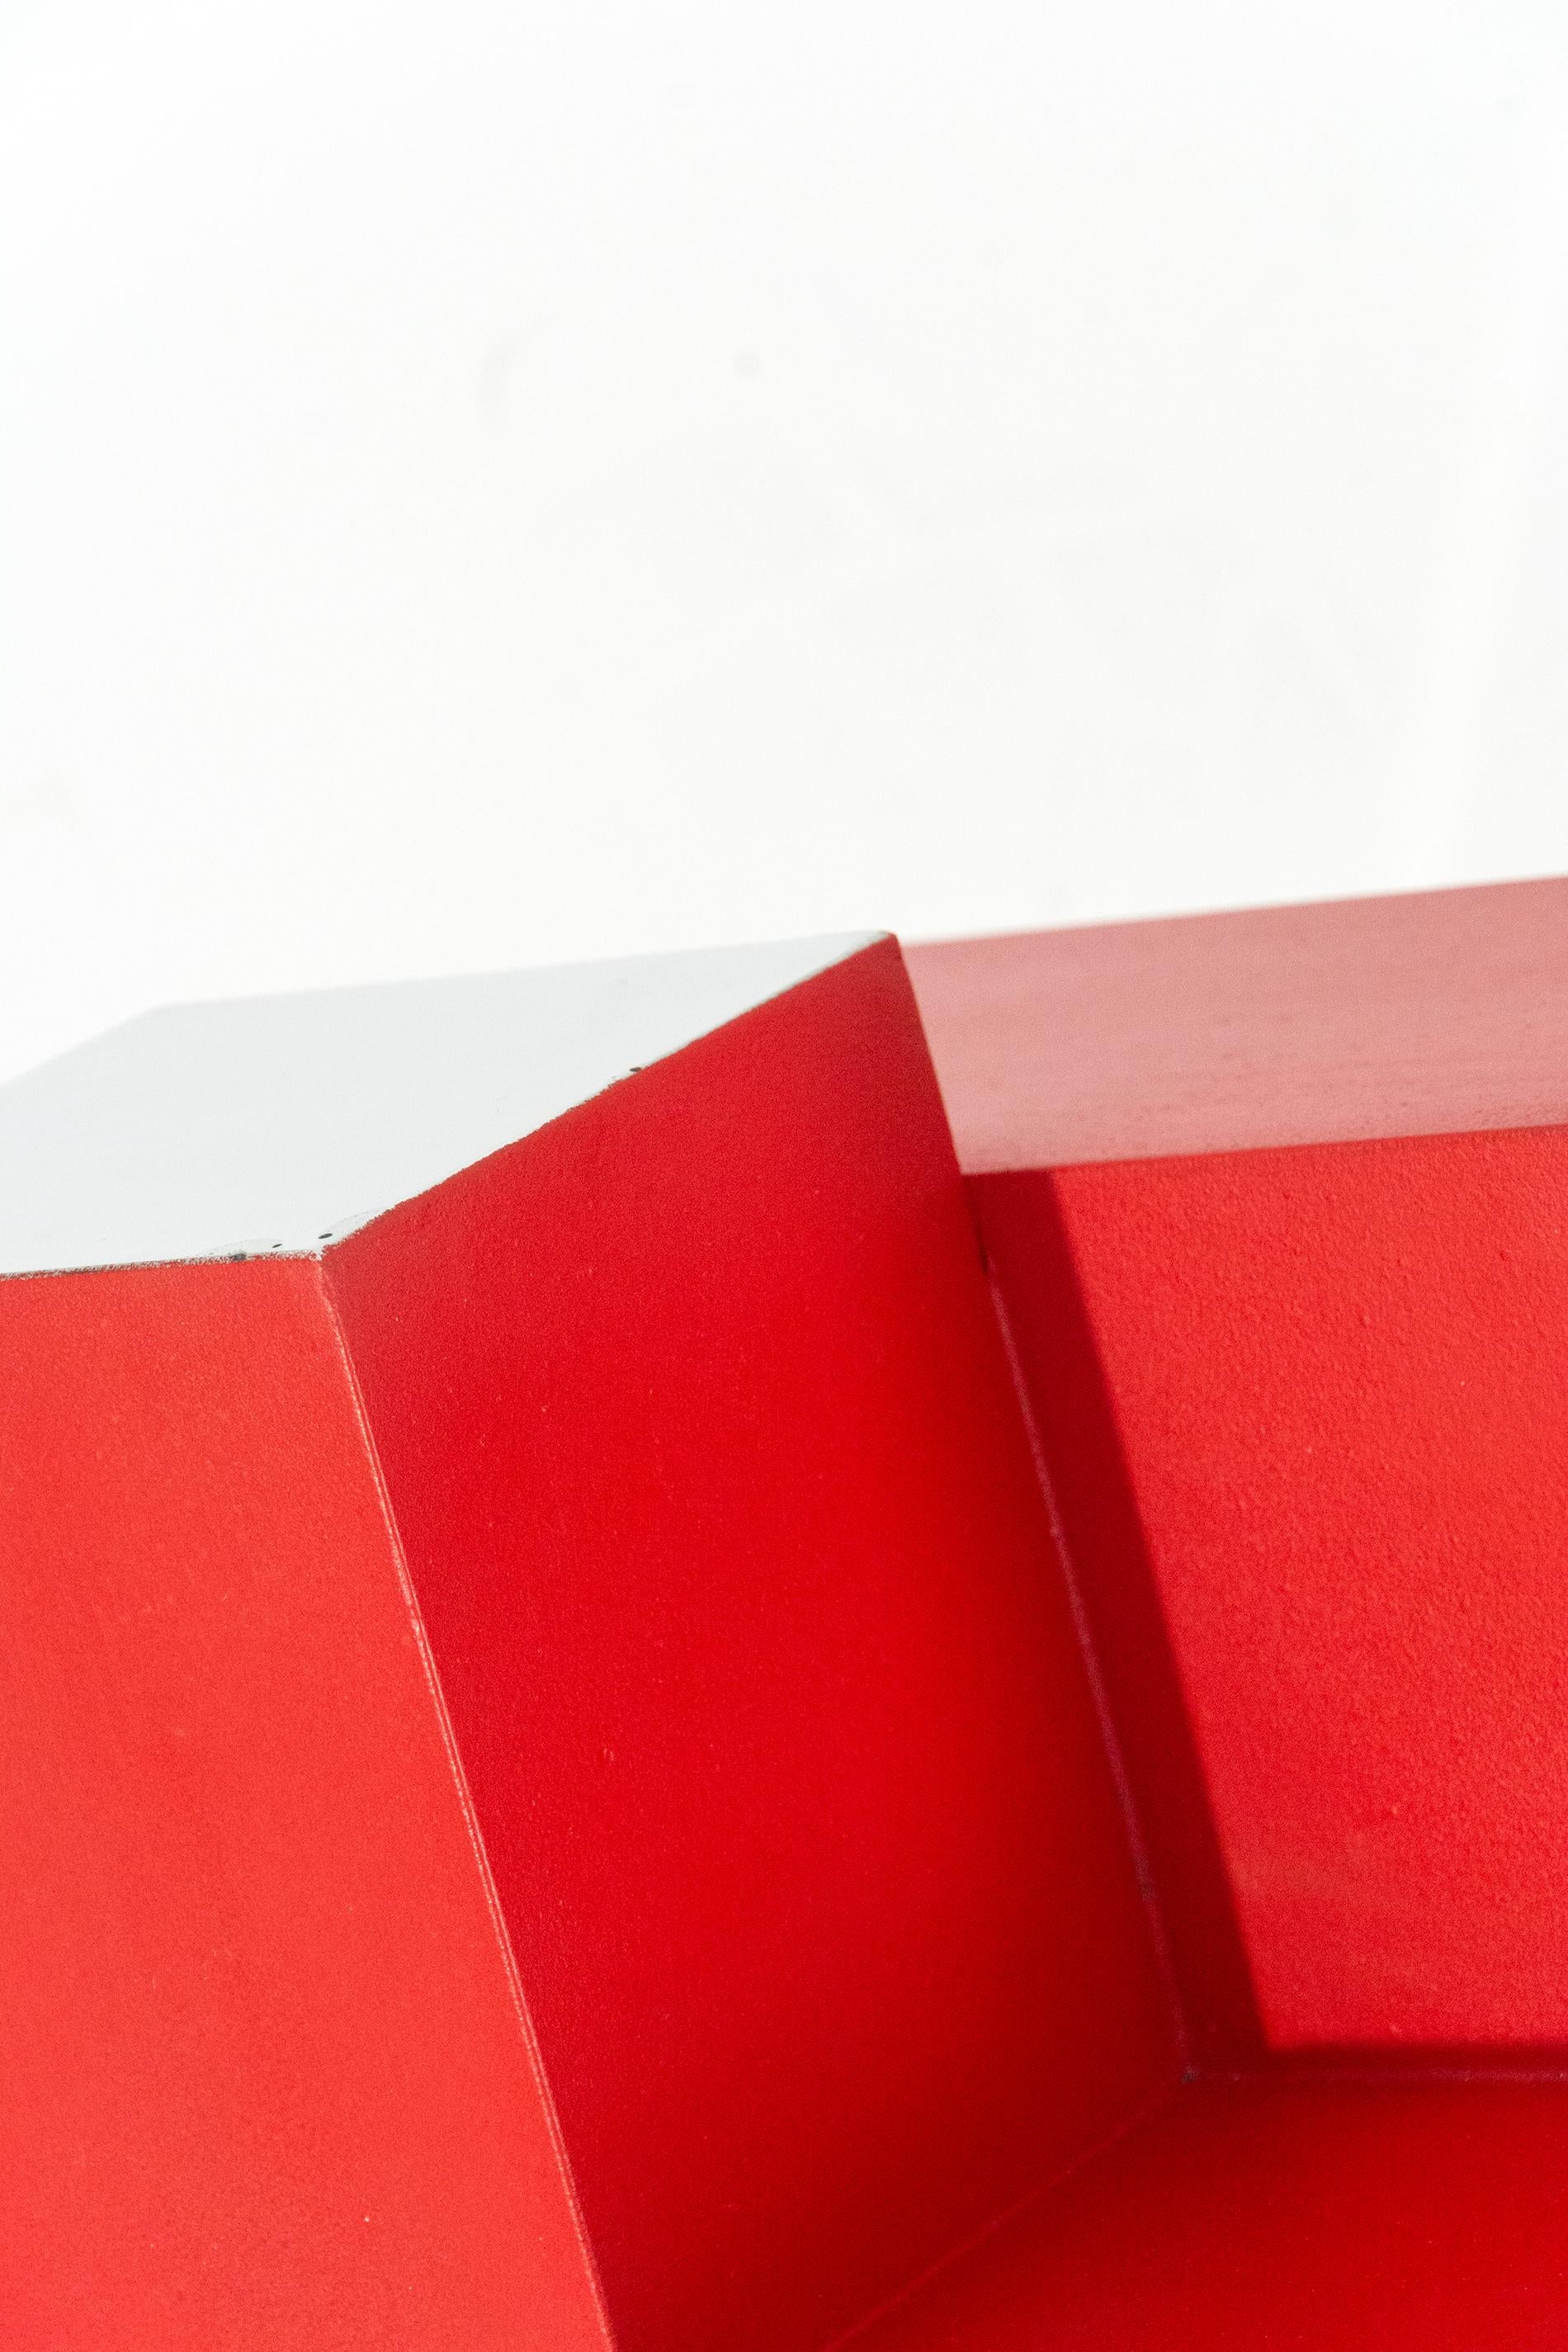 15 Inch Cube Red 2/10 - bright, Intersecting geometry, aluminum modern sculpture For Sale 1